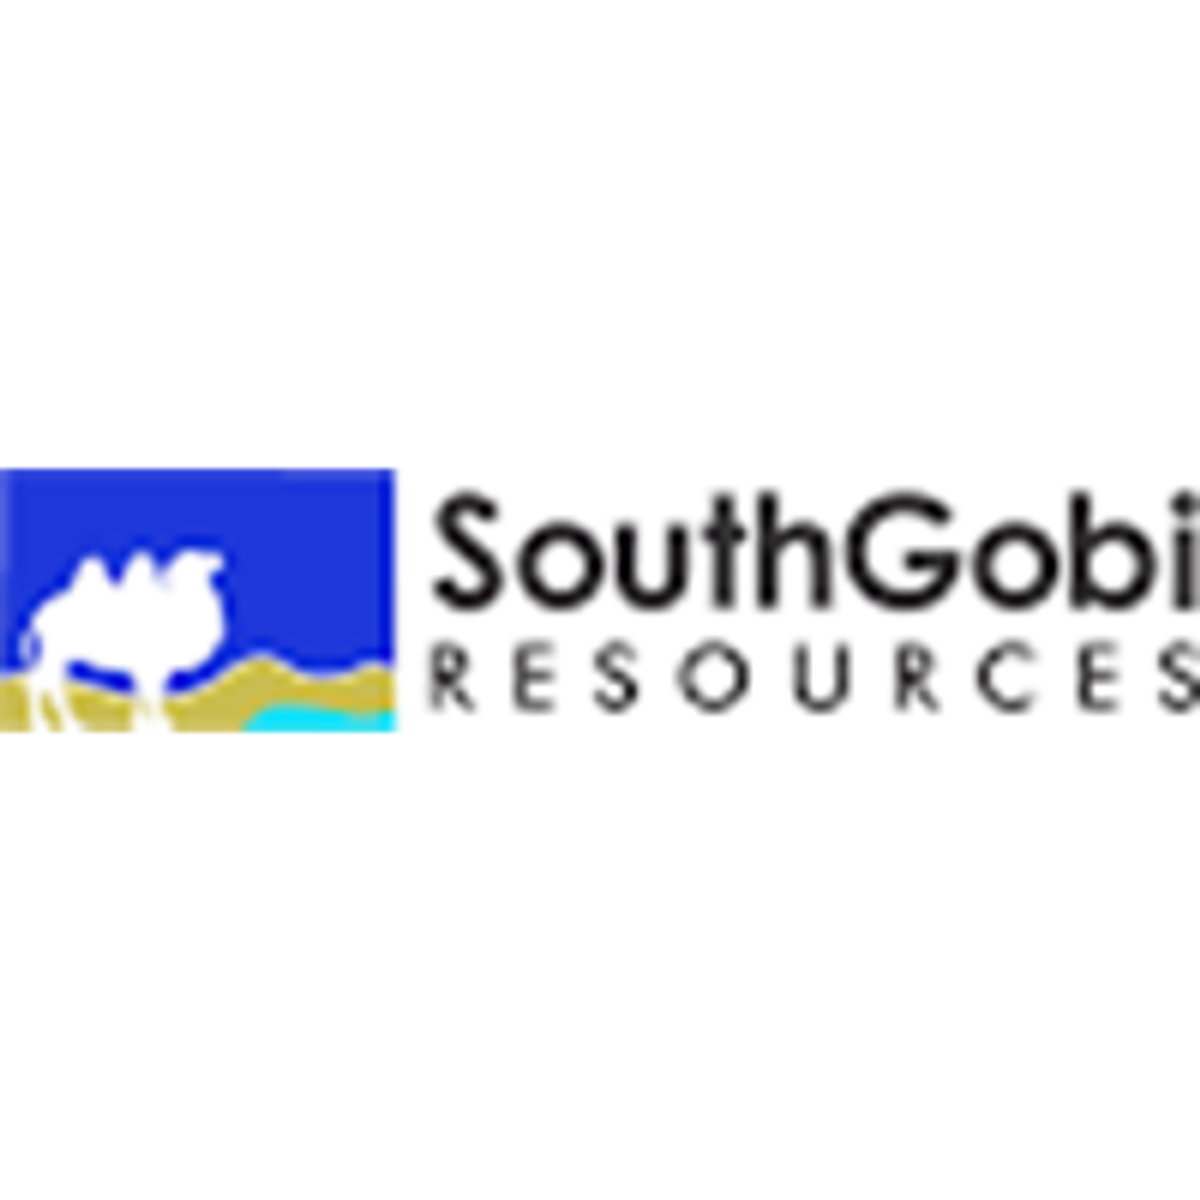 SouthGobi Announces Resignation of Non-Executive Directors and Change of Composition of Board Committee